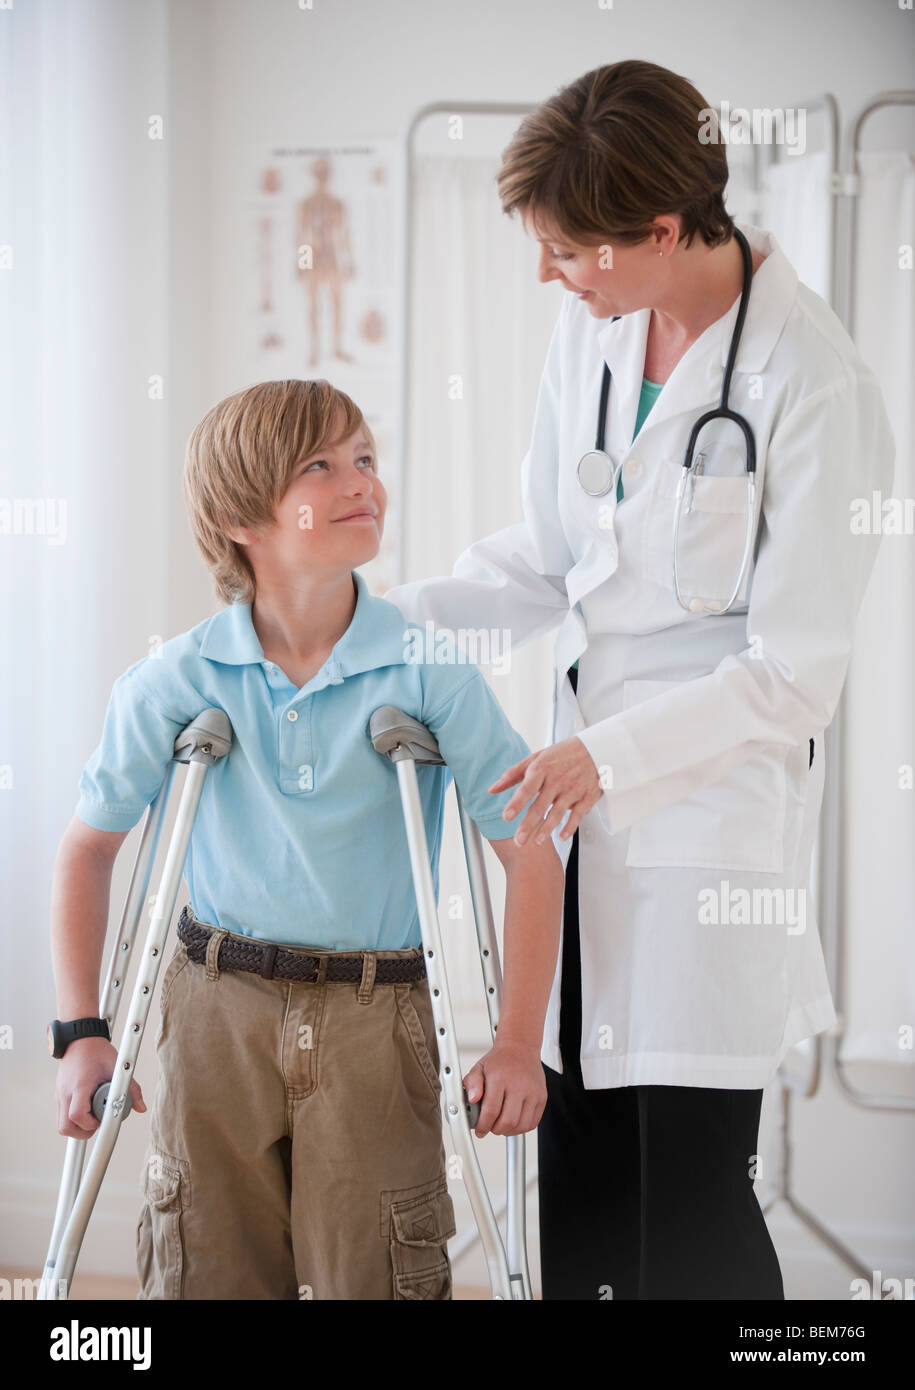 Female doctor assisting boy on crutches Stock Photo